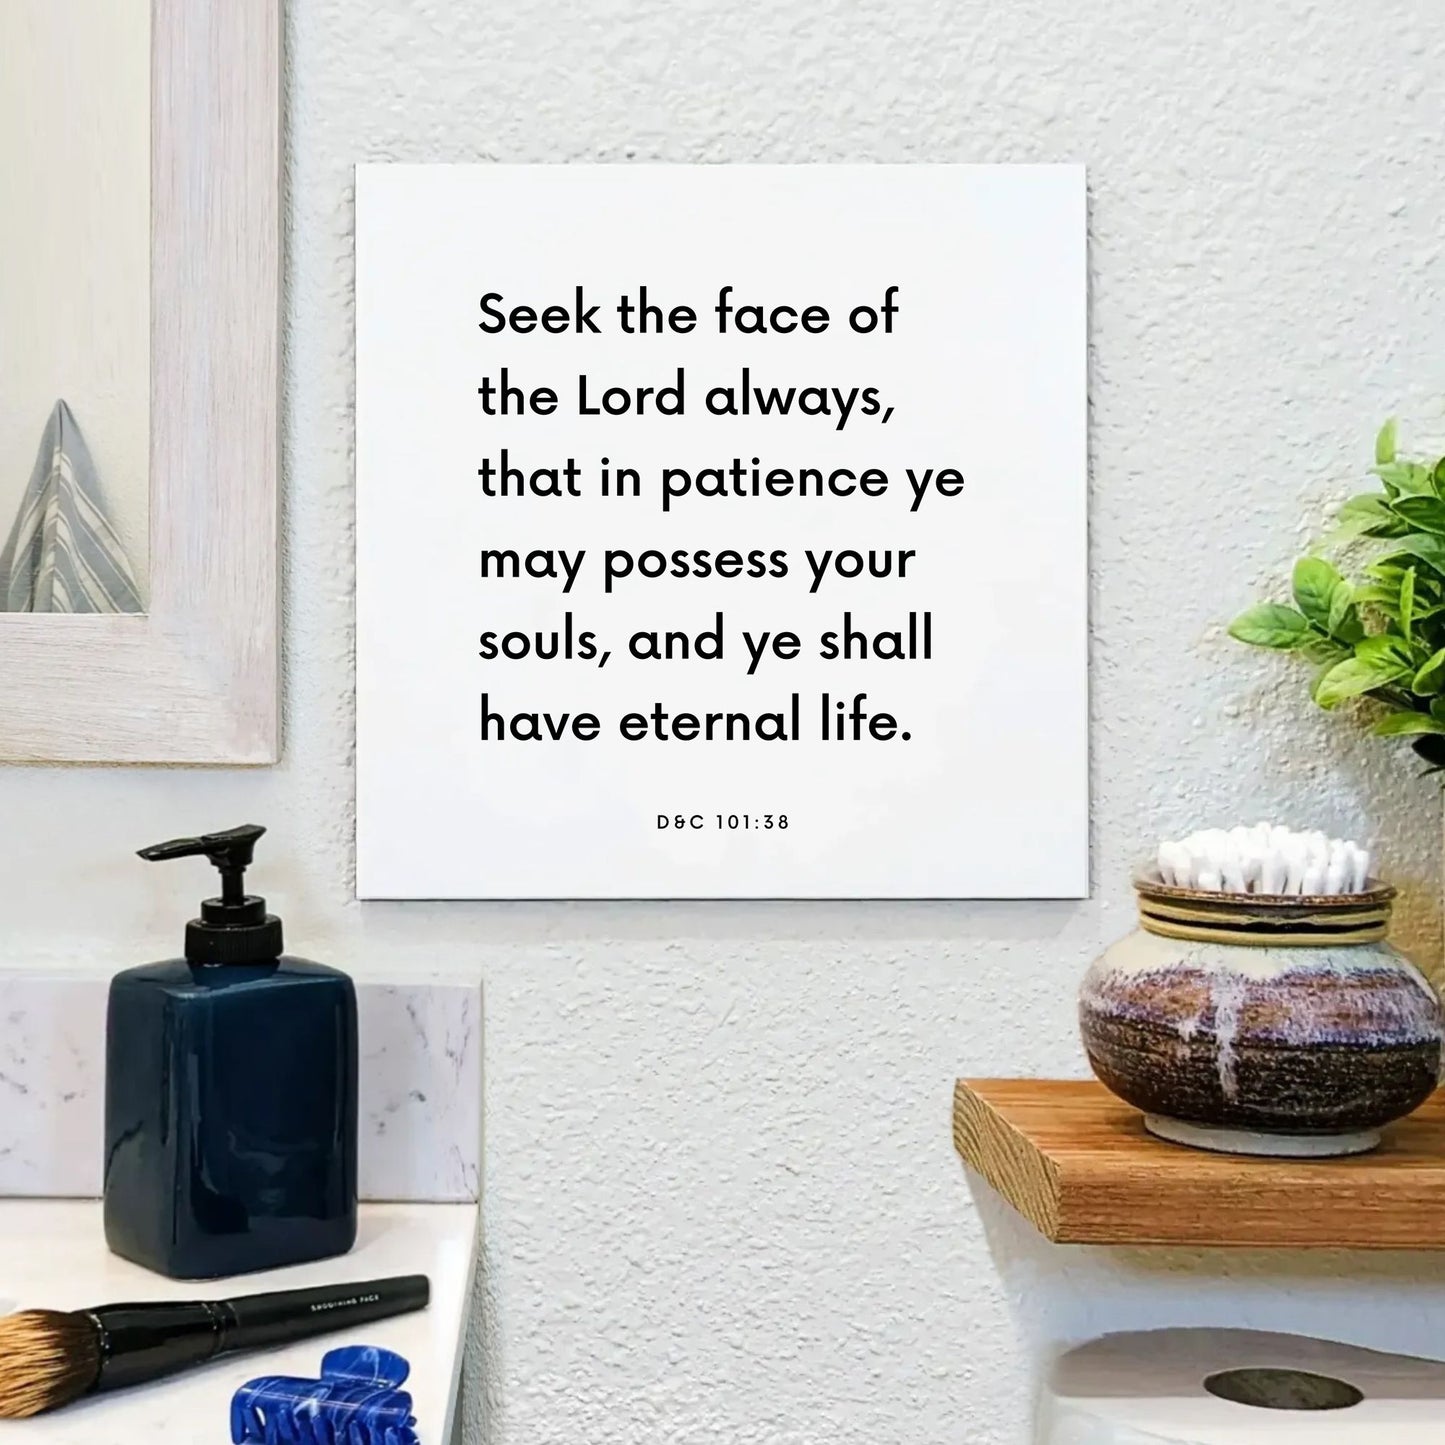 Bathroom mouting of the scripture tile for D&C 101:38 - "Seek the face of the Lord always"